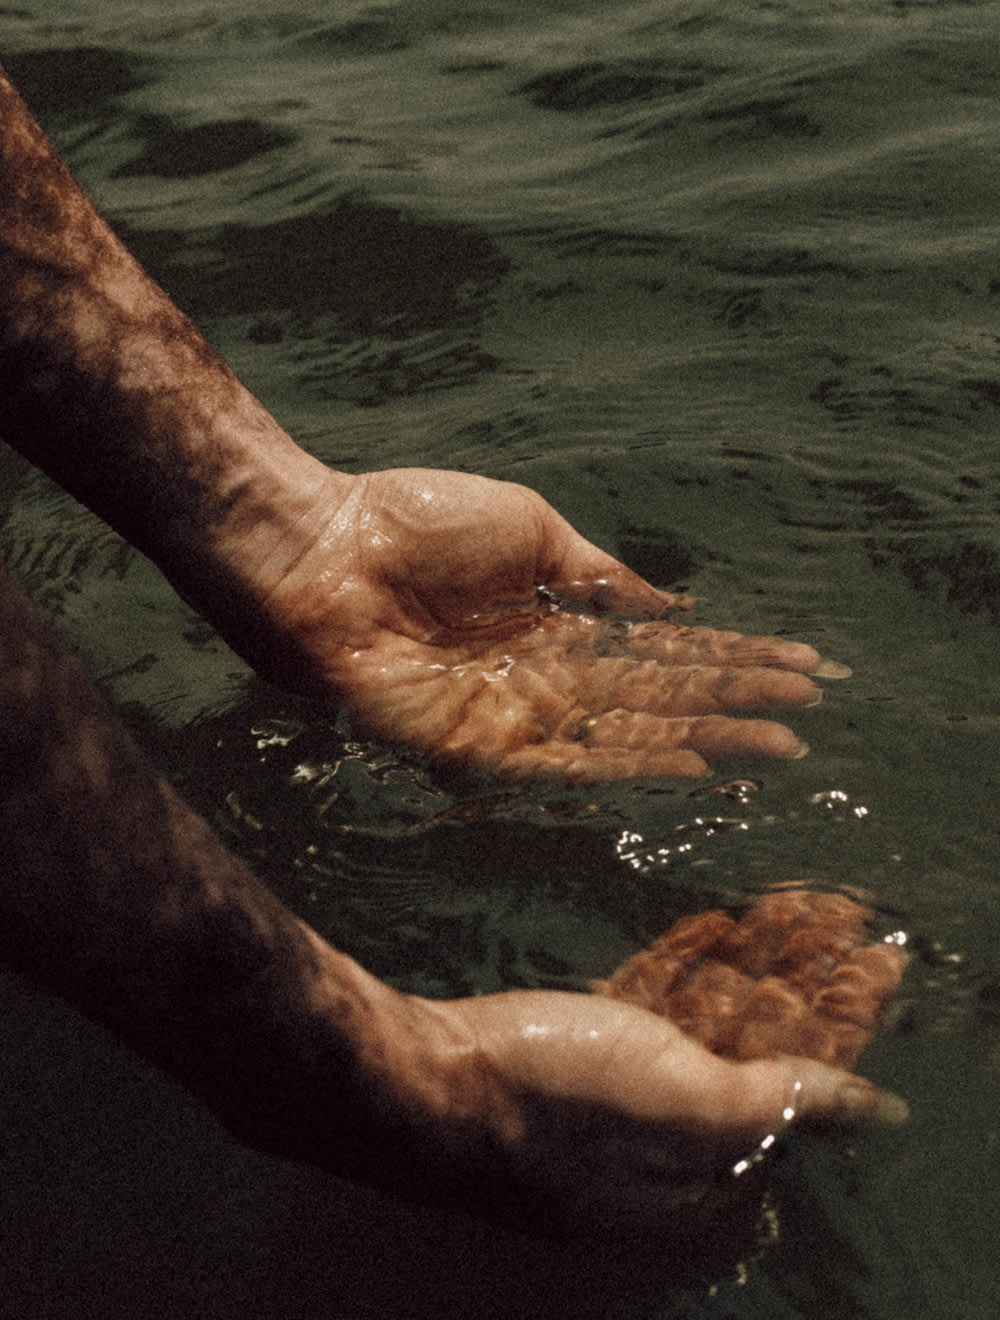 a hand reaching for something in the water